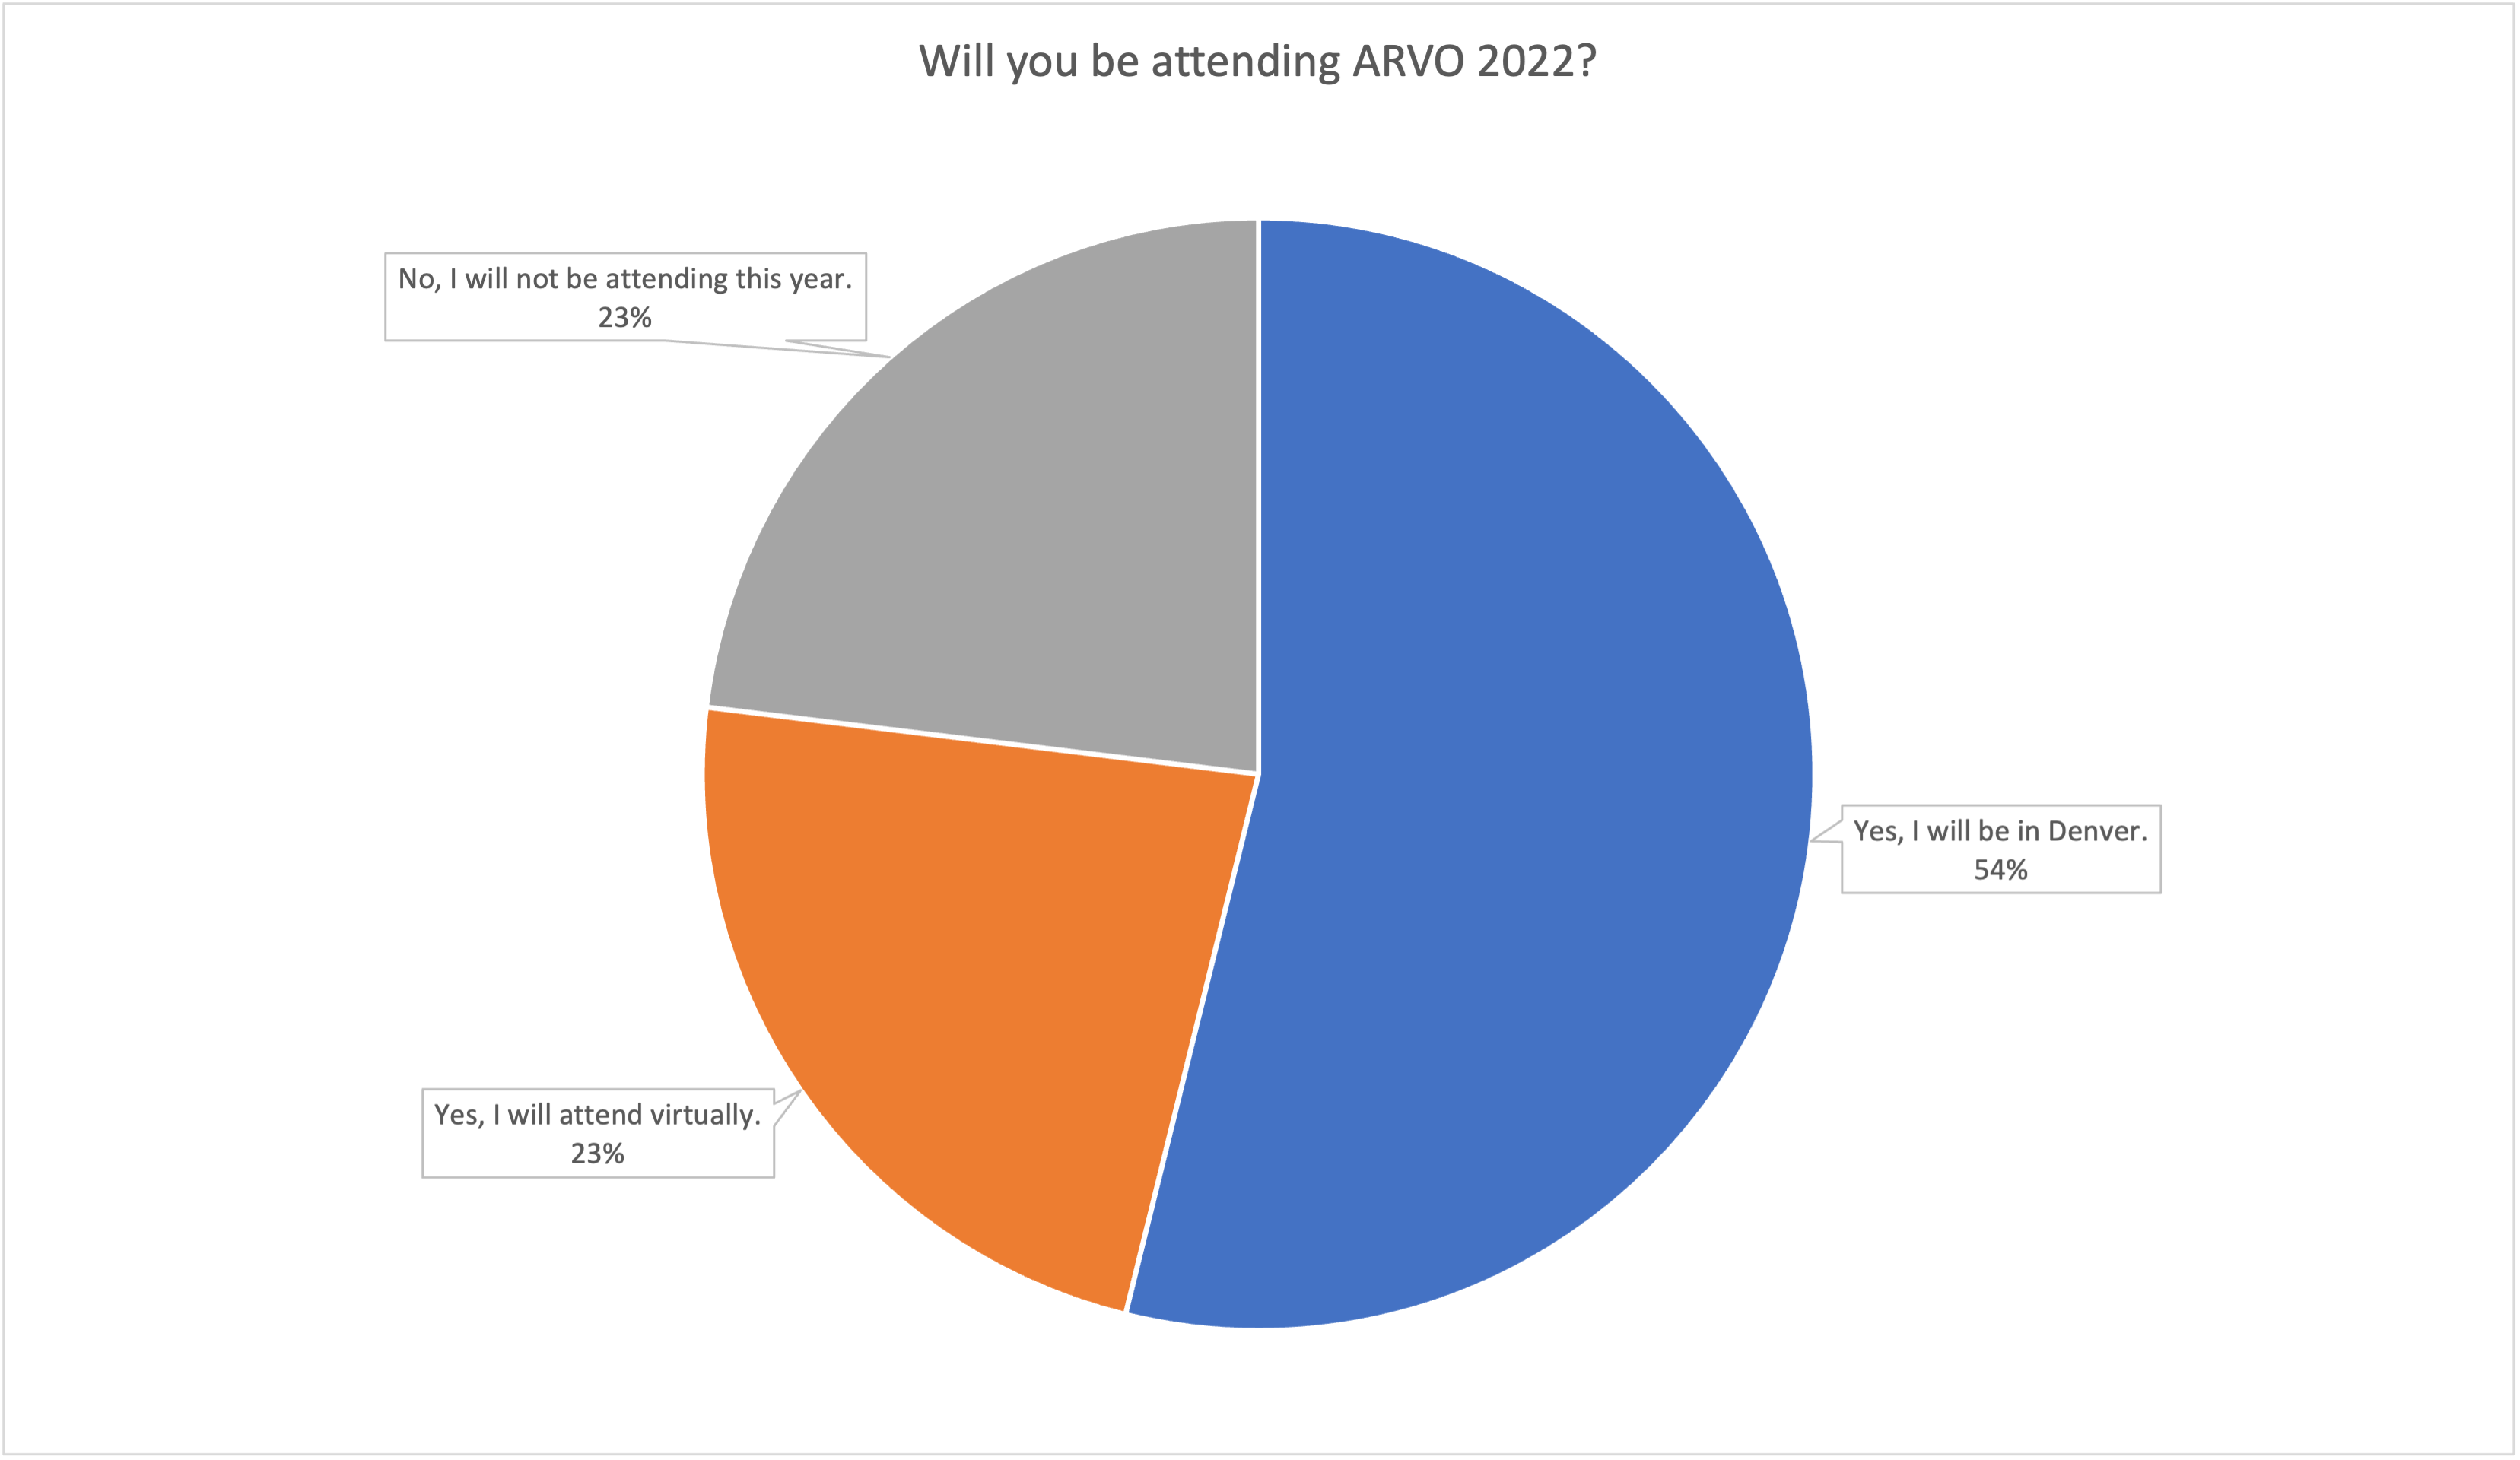 Poll results: Will you be attending ARVO 2022?